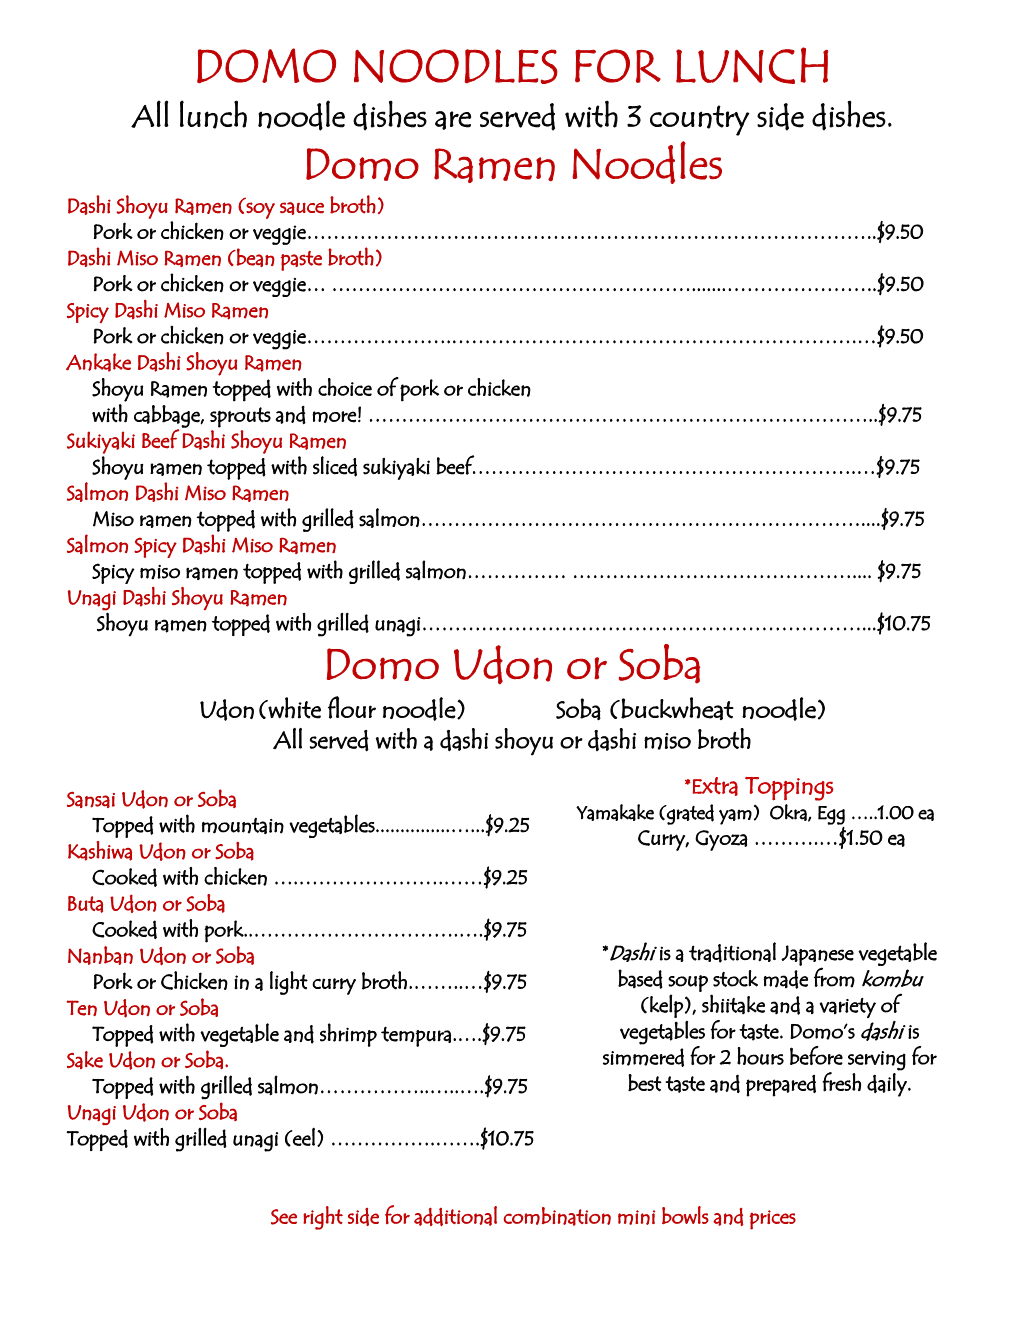 DOMO NOODLES for LUNCH All Lunch Noodle Dishes Are Served with 3 Country Side Dishes